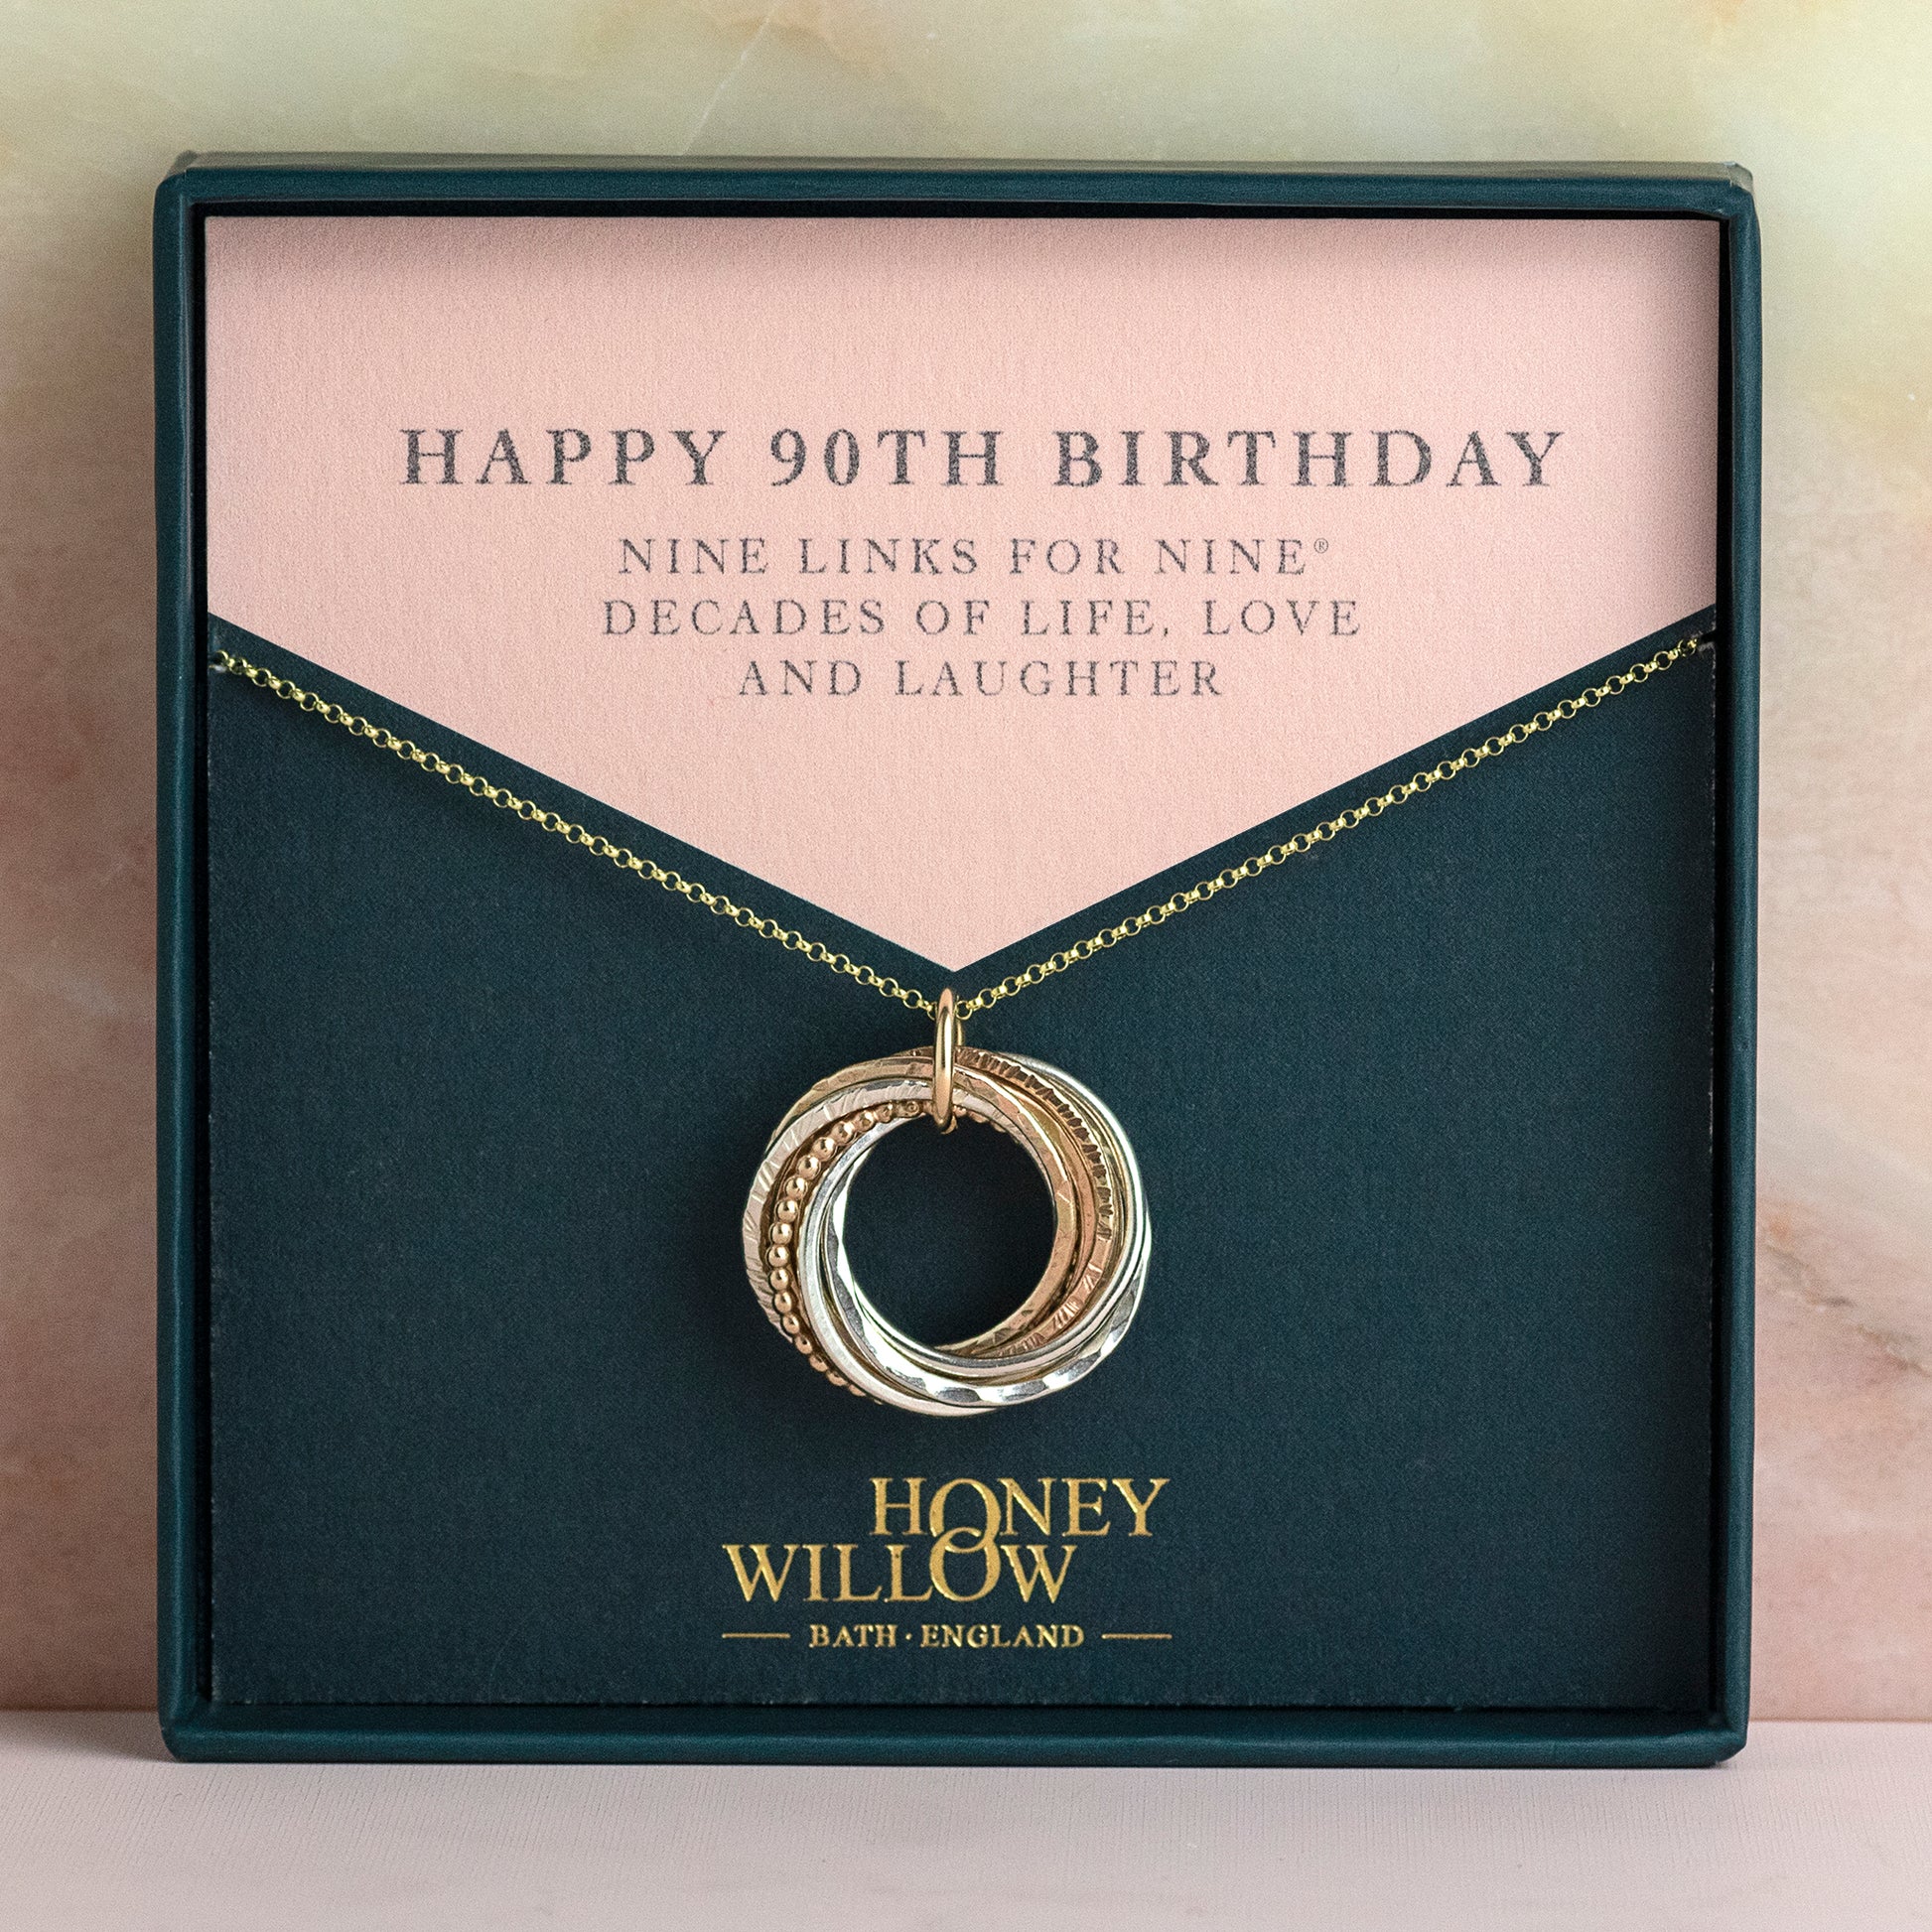 9kt Gold 90th Birthday Necklace - The Original 9 Links for 9 Decades Necklace - Recycled Gold, Rose Gold & Silver